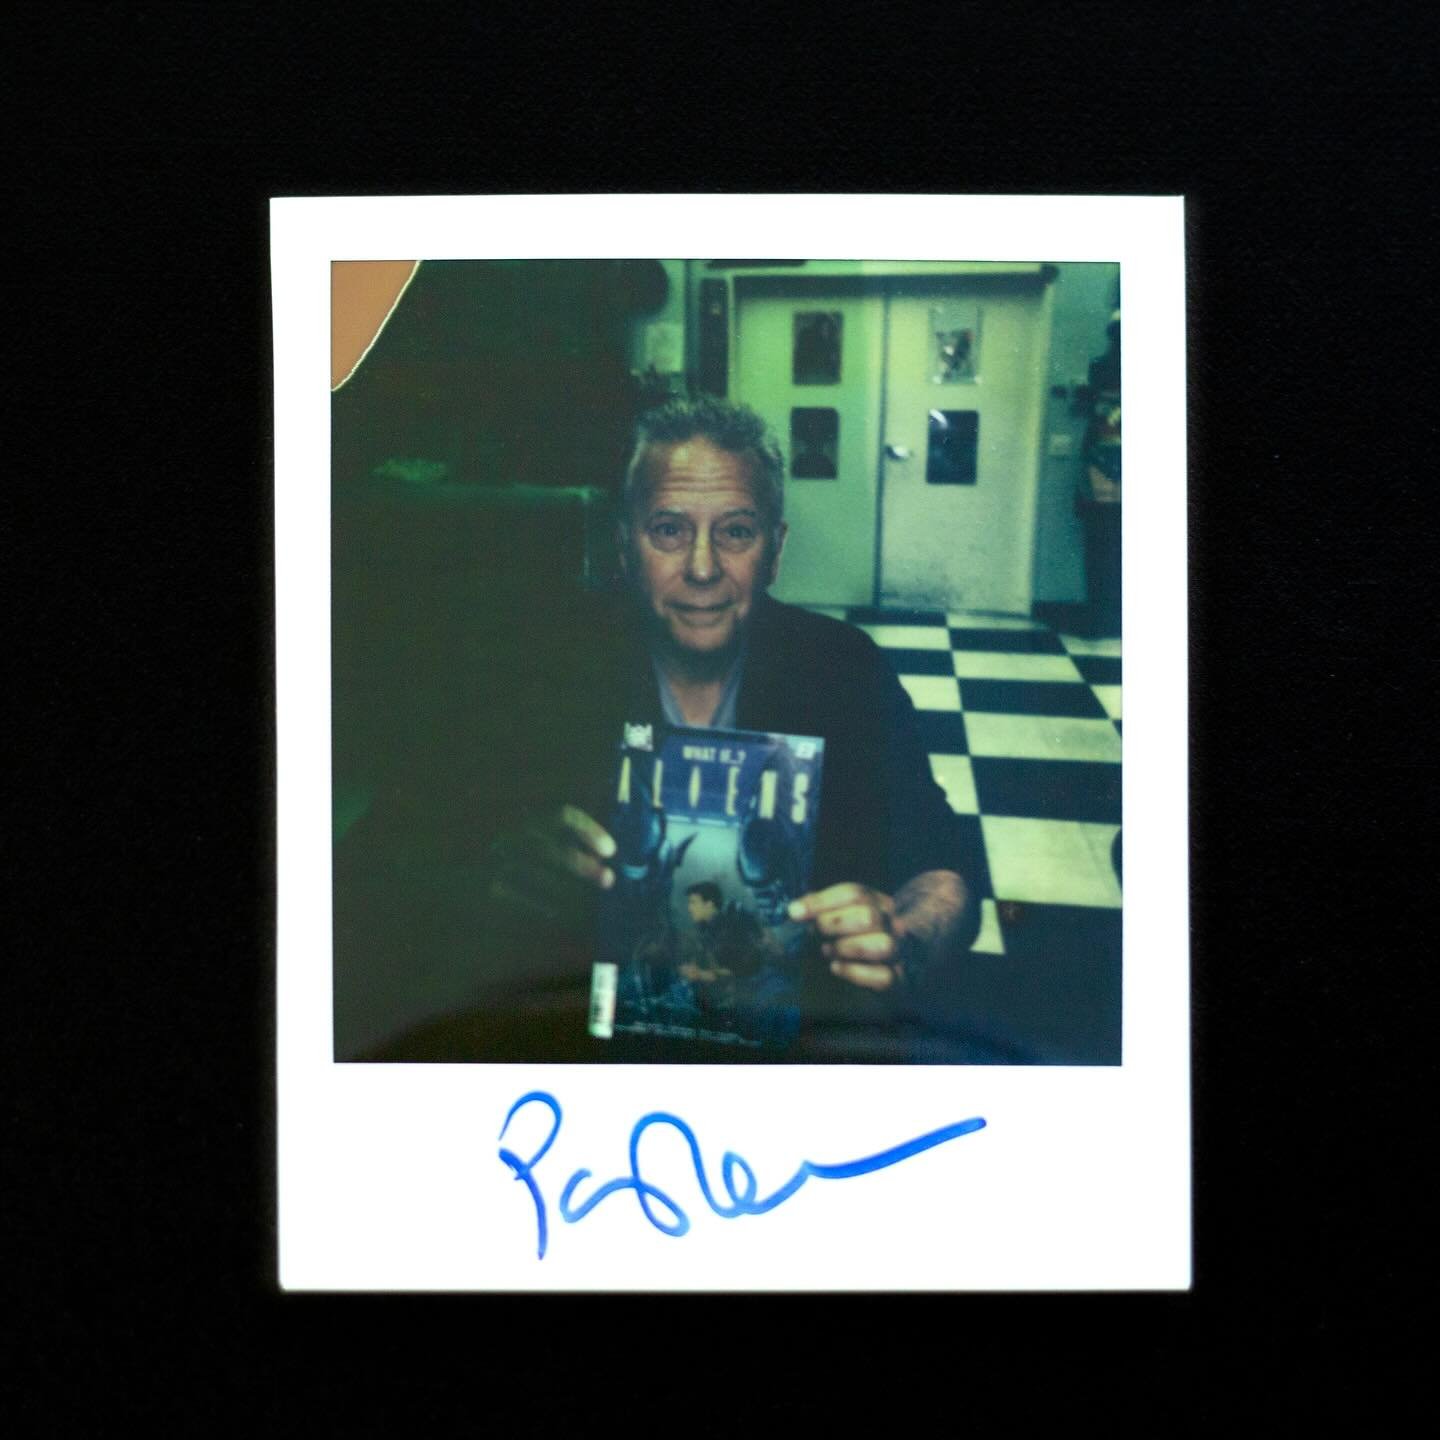 So Burke turned out to really be an okay guy.

It was an absolute pleasure meeting and snapping this @polaroid of @paulreiserofficial during a signing of the new ALIENS &ldquo;What If&hellip;?&rdquo; series from @marvel, along with director @brianvol